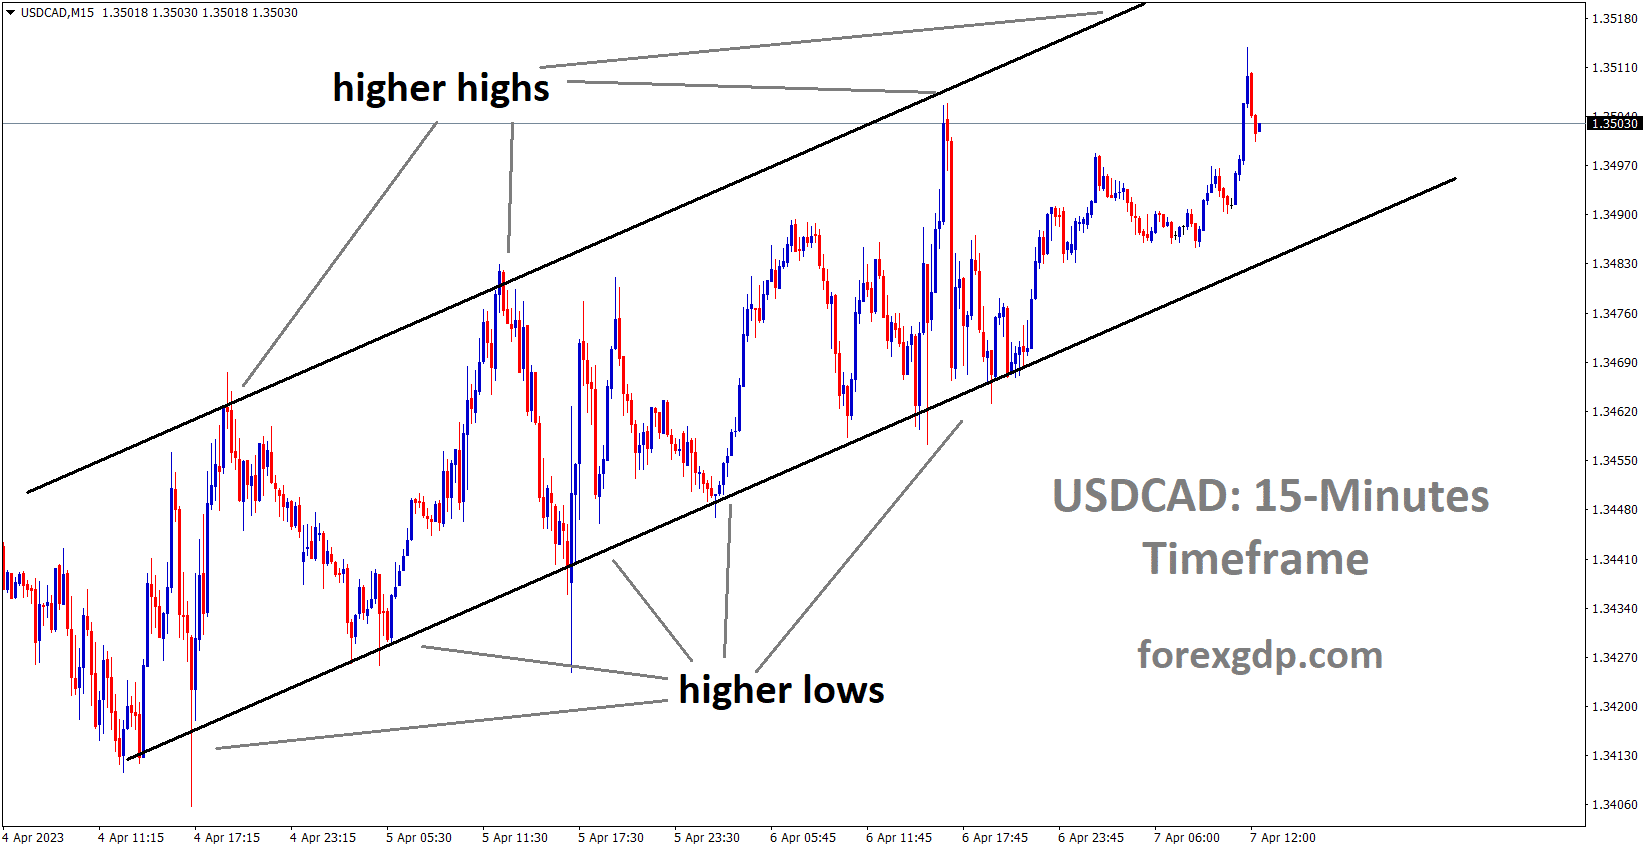 USDCAD is moving in an Ascending channel and the market has rebounded from the higher low area of the channel 1